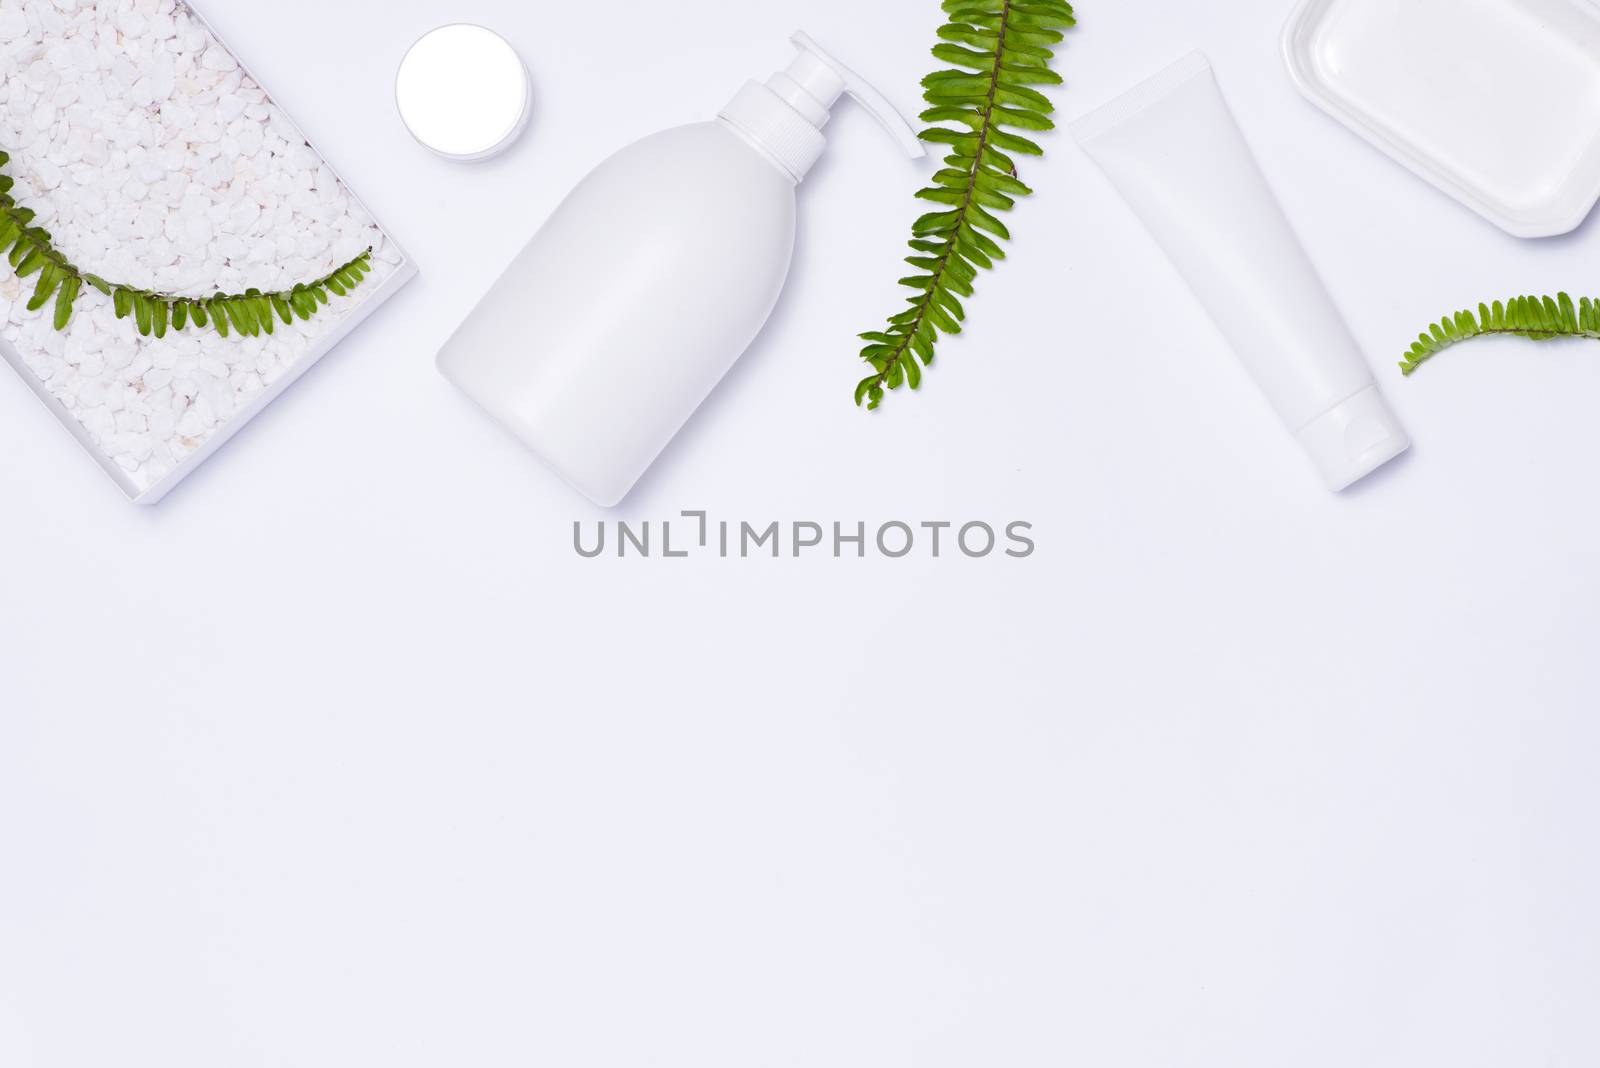 Cosmetics SPA branding mock-up, top view, on white background.